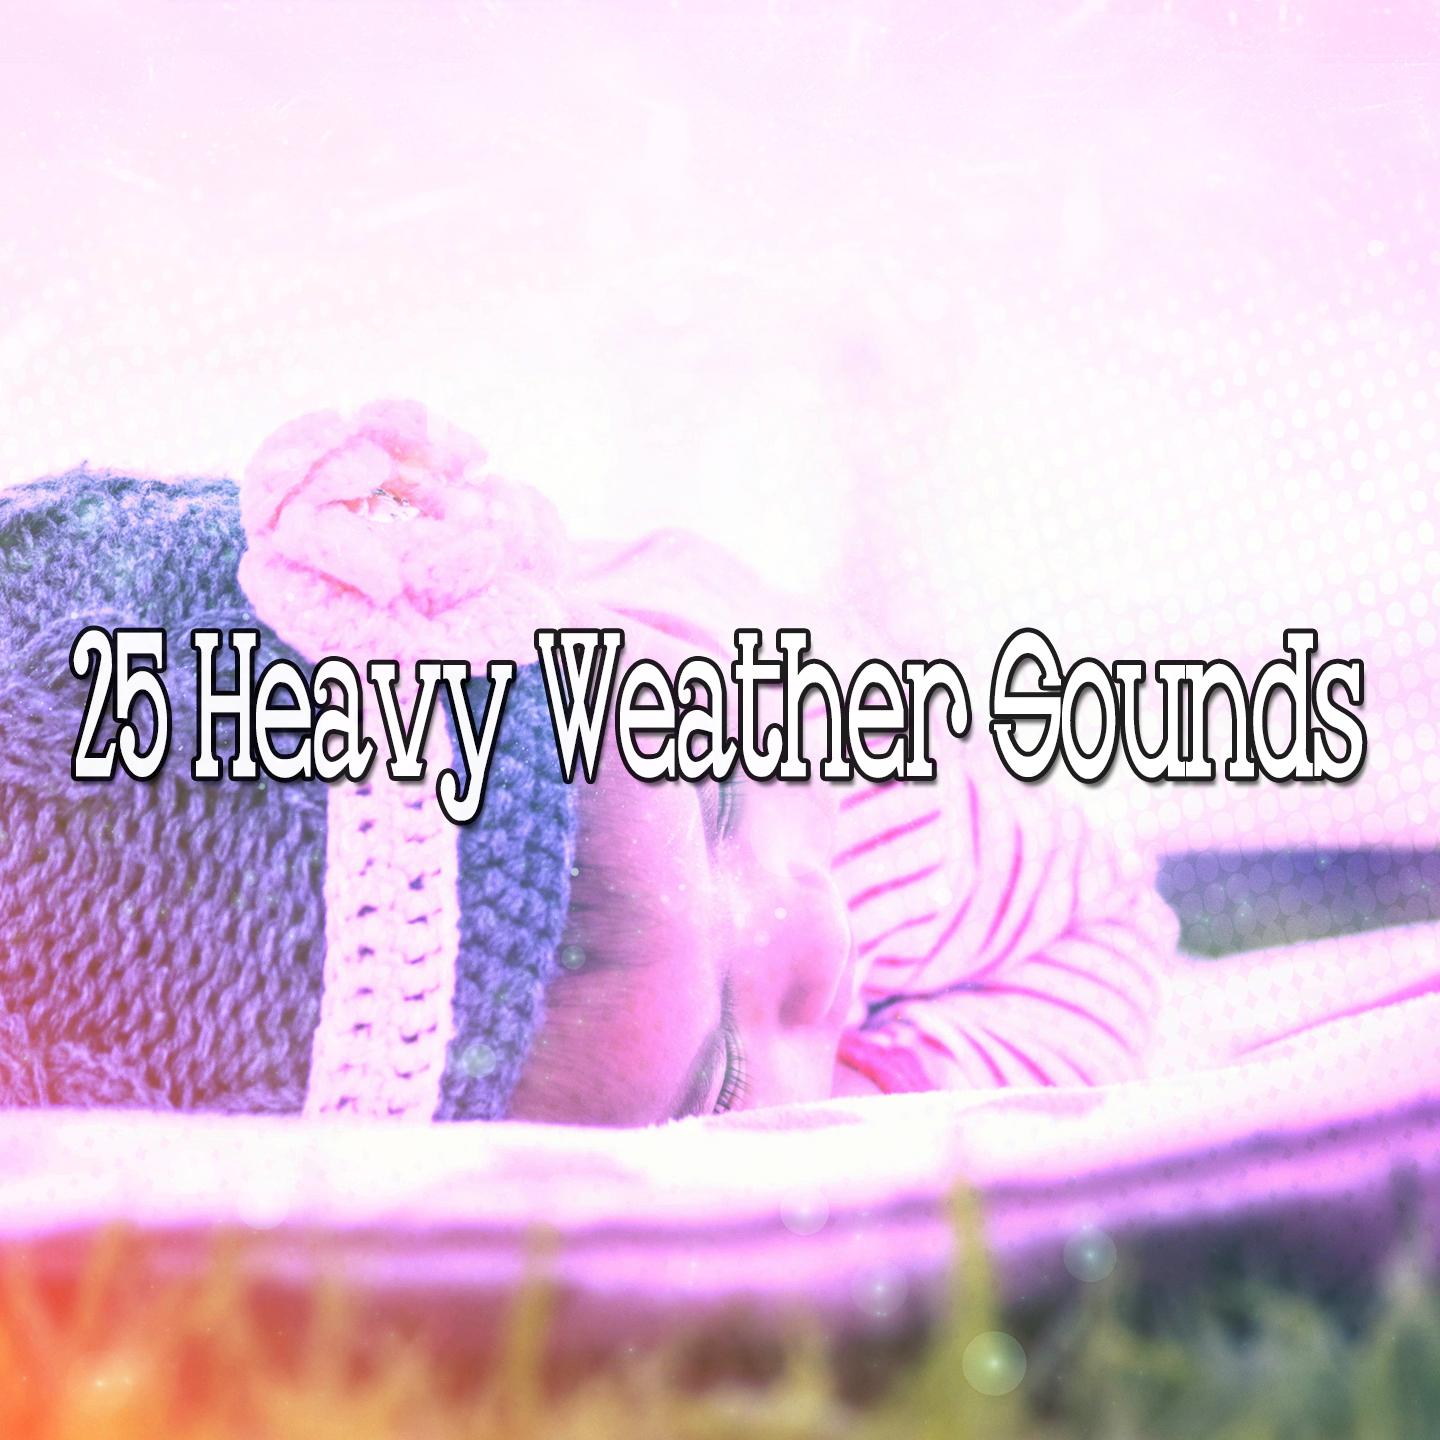 25 Heavy Weather Sounds